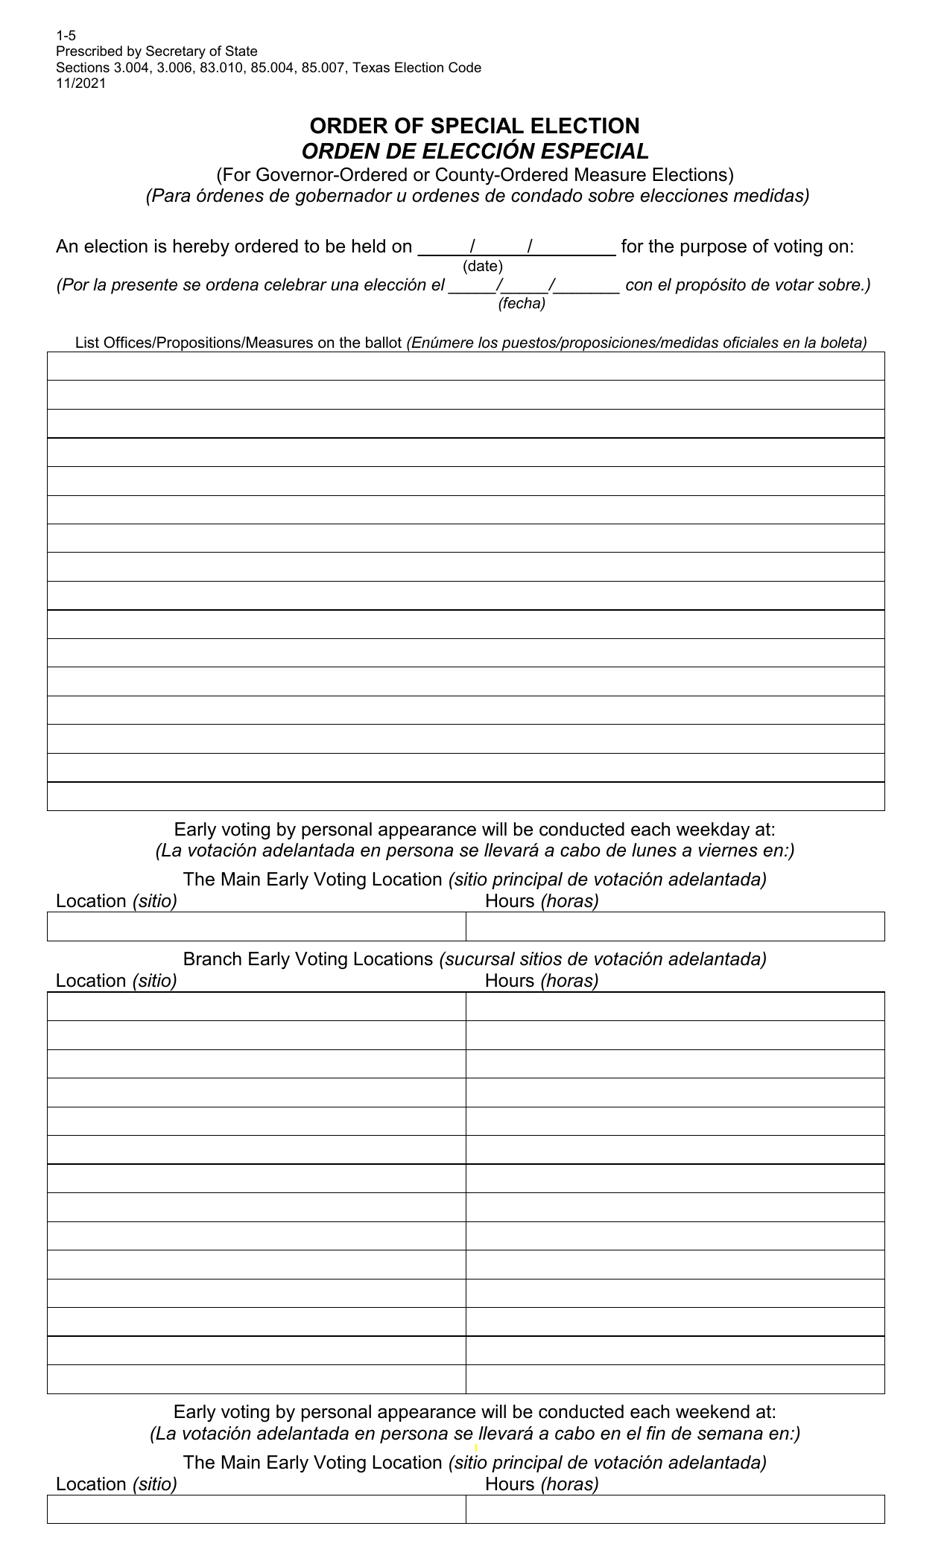 Form 1-5 Order of Special Election - Texas (English / Spanish), Page 1